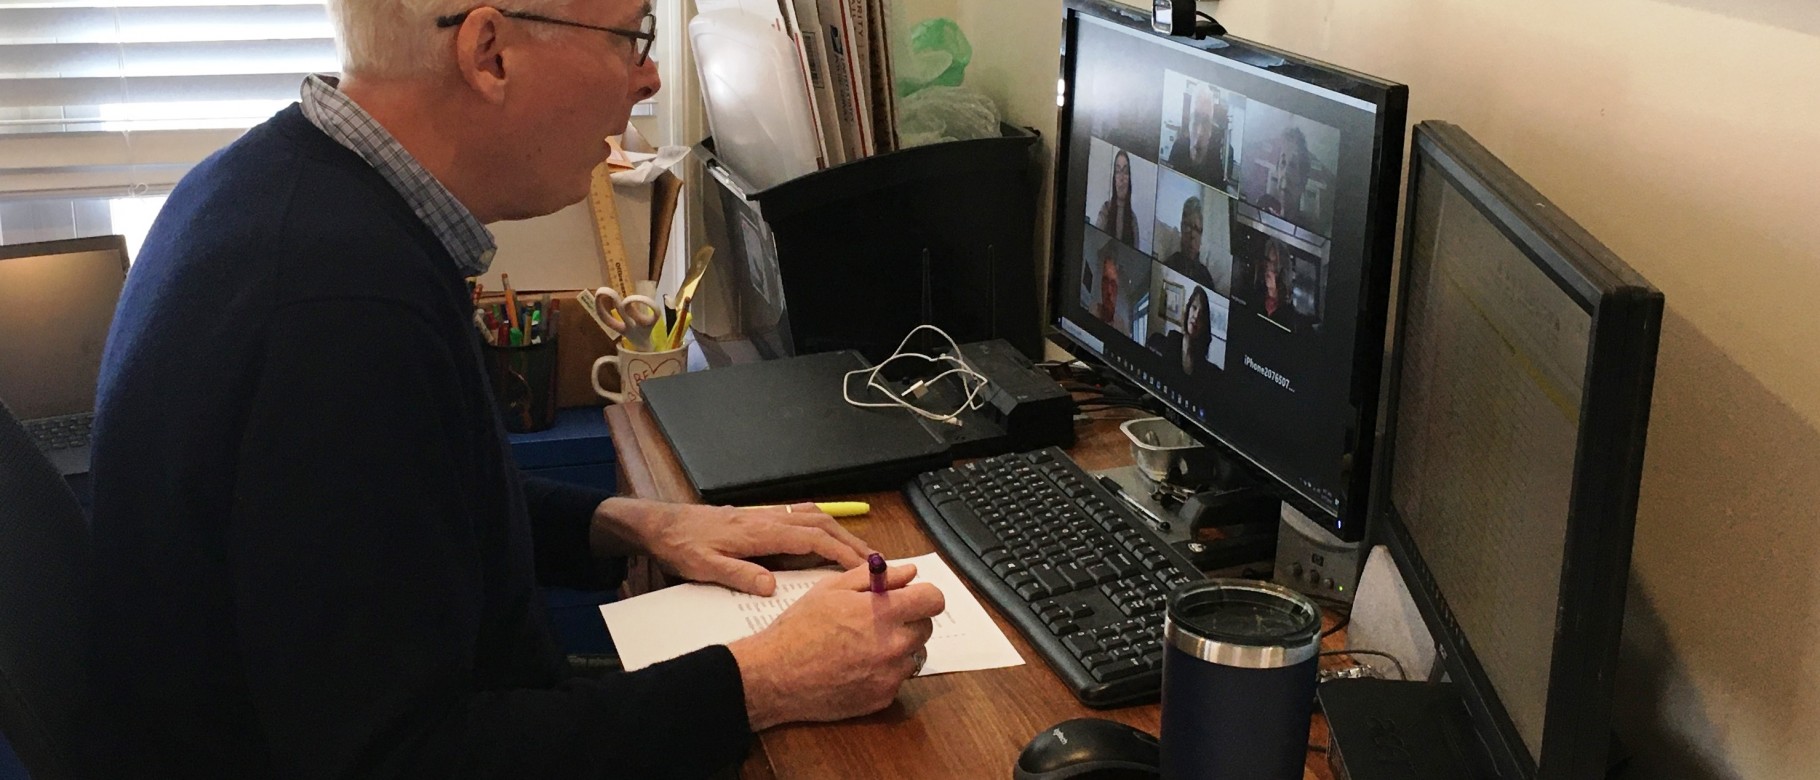 Tom Meuser, along with other faculty and student volunteers, is hosting sessions to connect older adults online